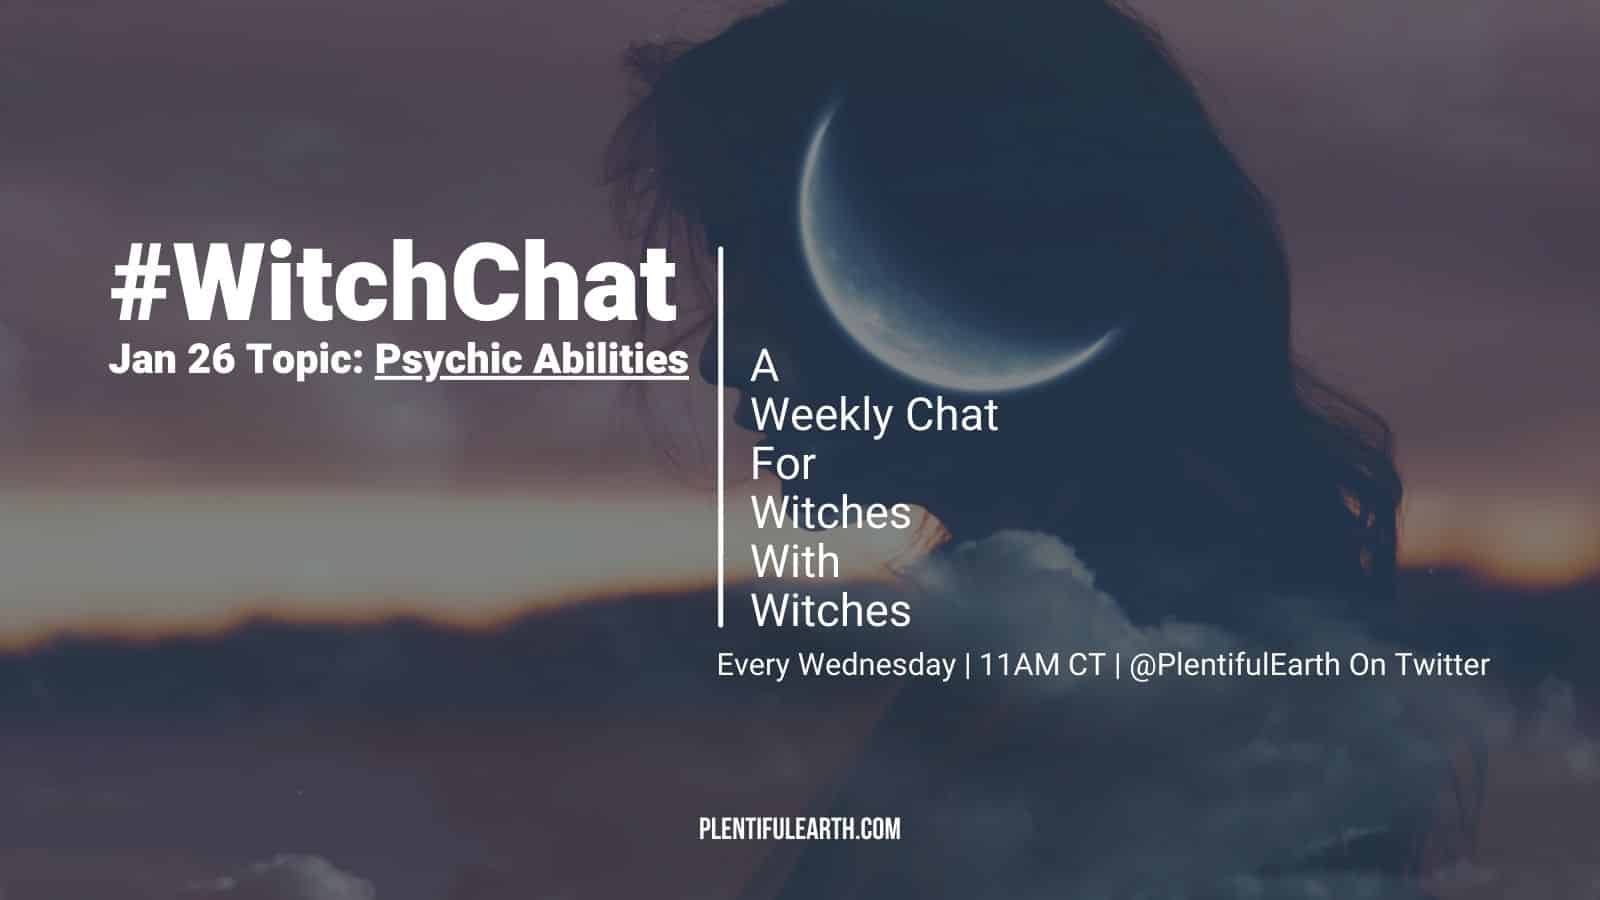 Witches Share How To Develop Psychic Abilities [#WitchChat Recap]